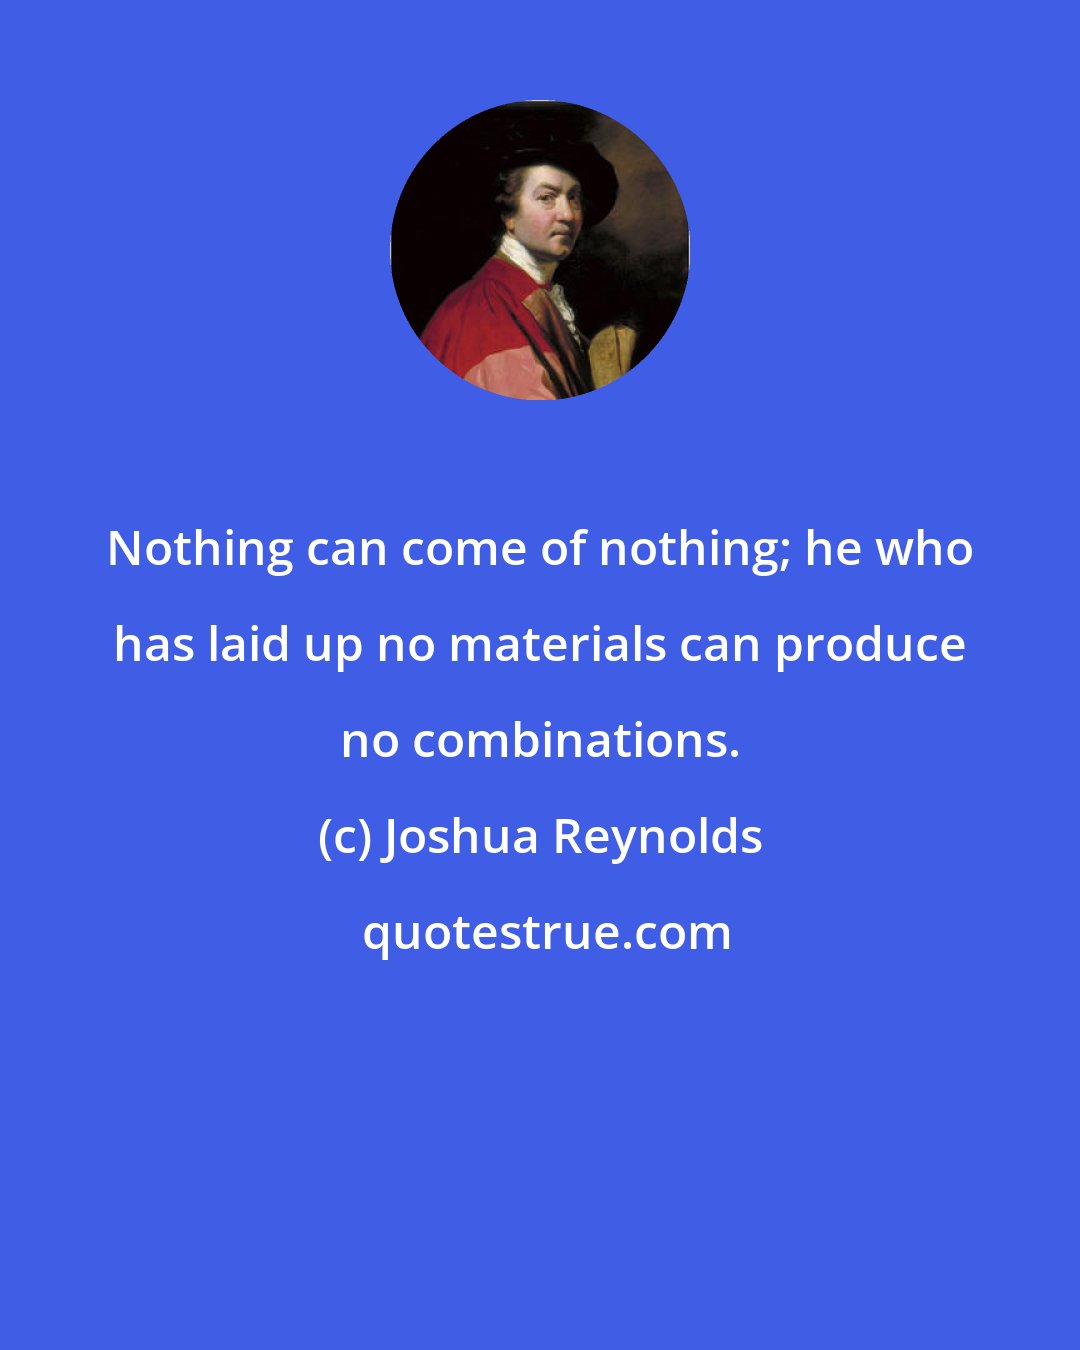 Joshua Reynolds: Nothing can come of nothing; he who has laid up no materials can produce no combinations.